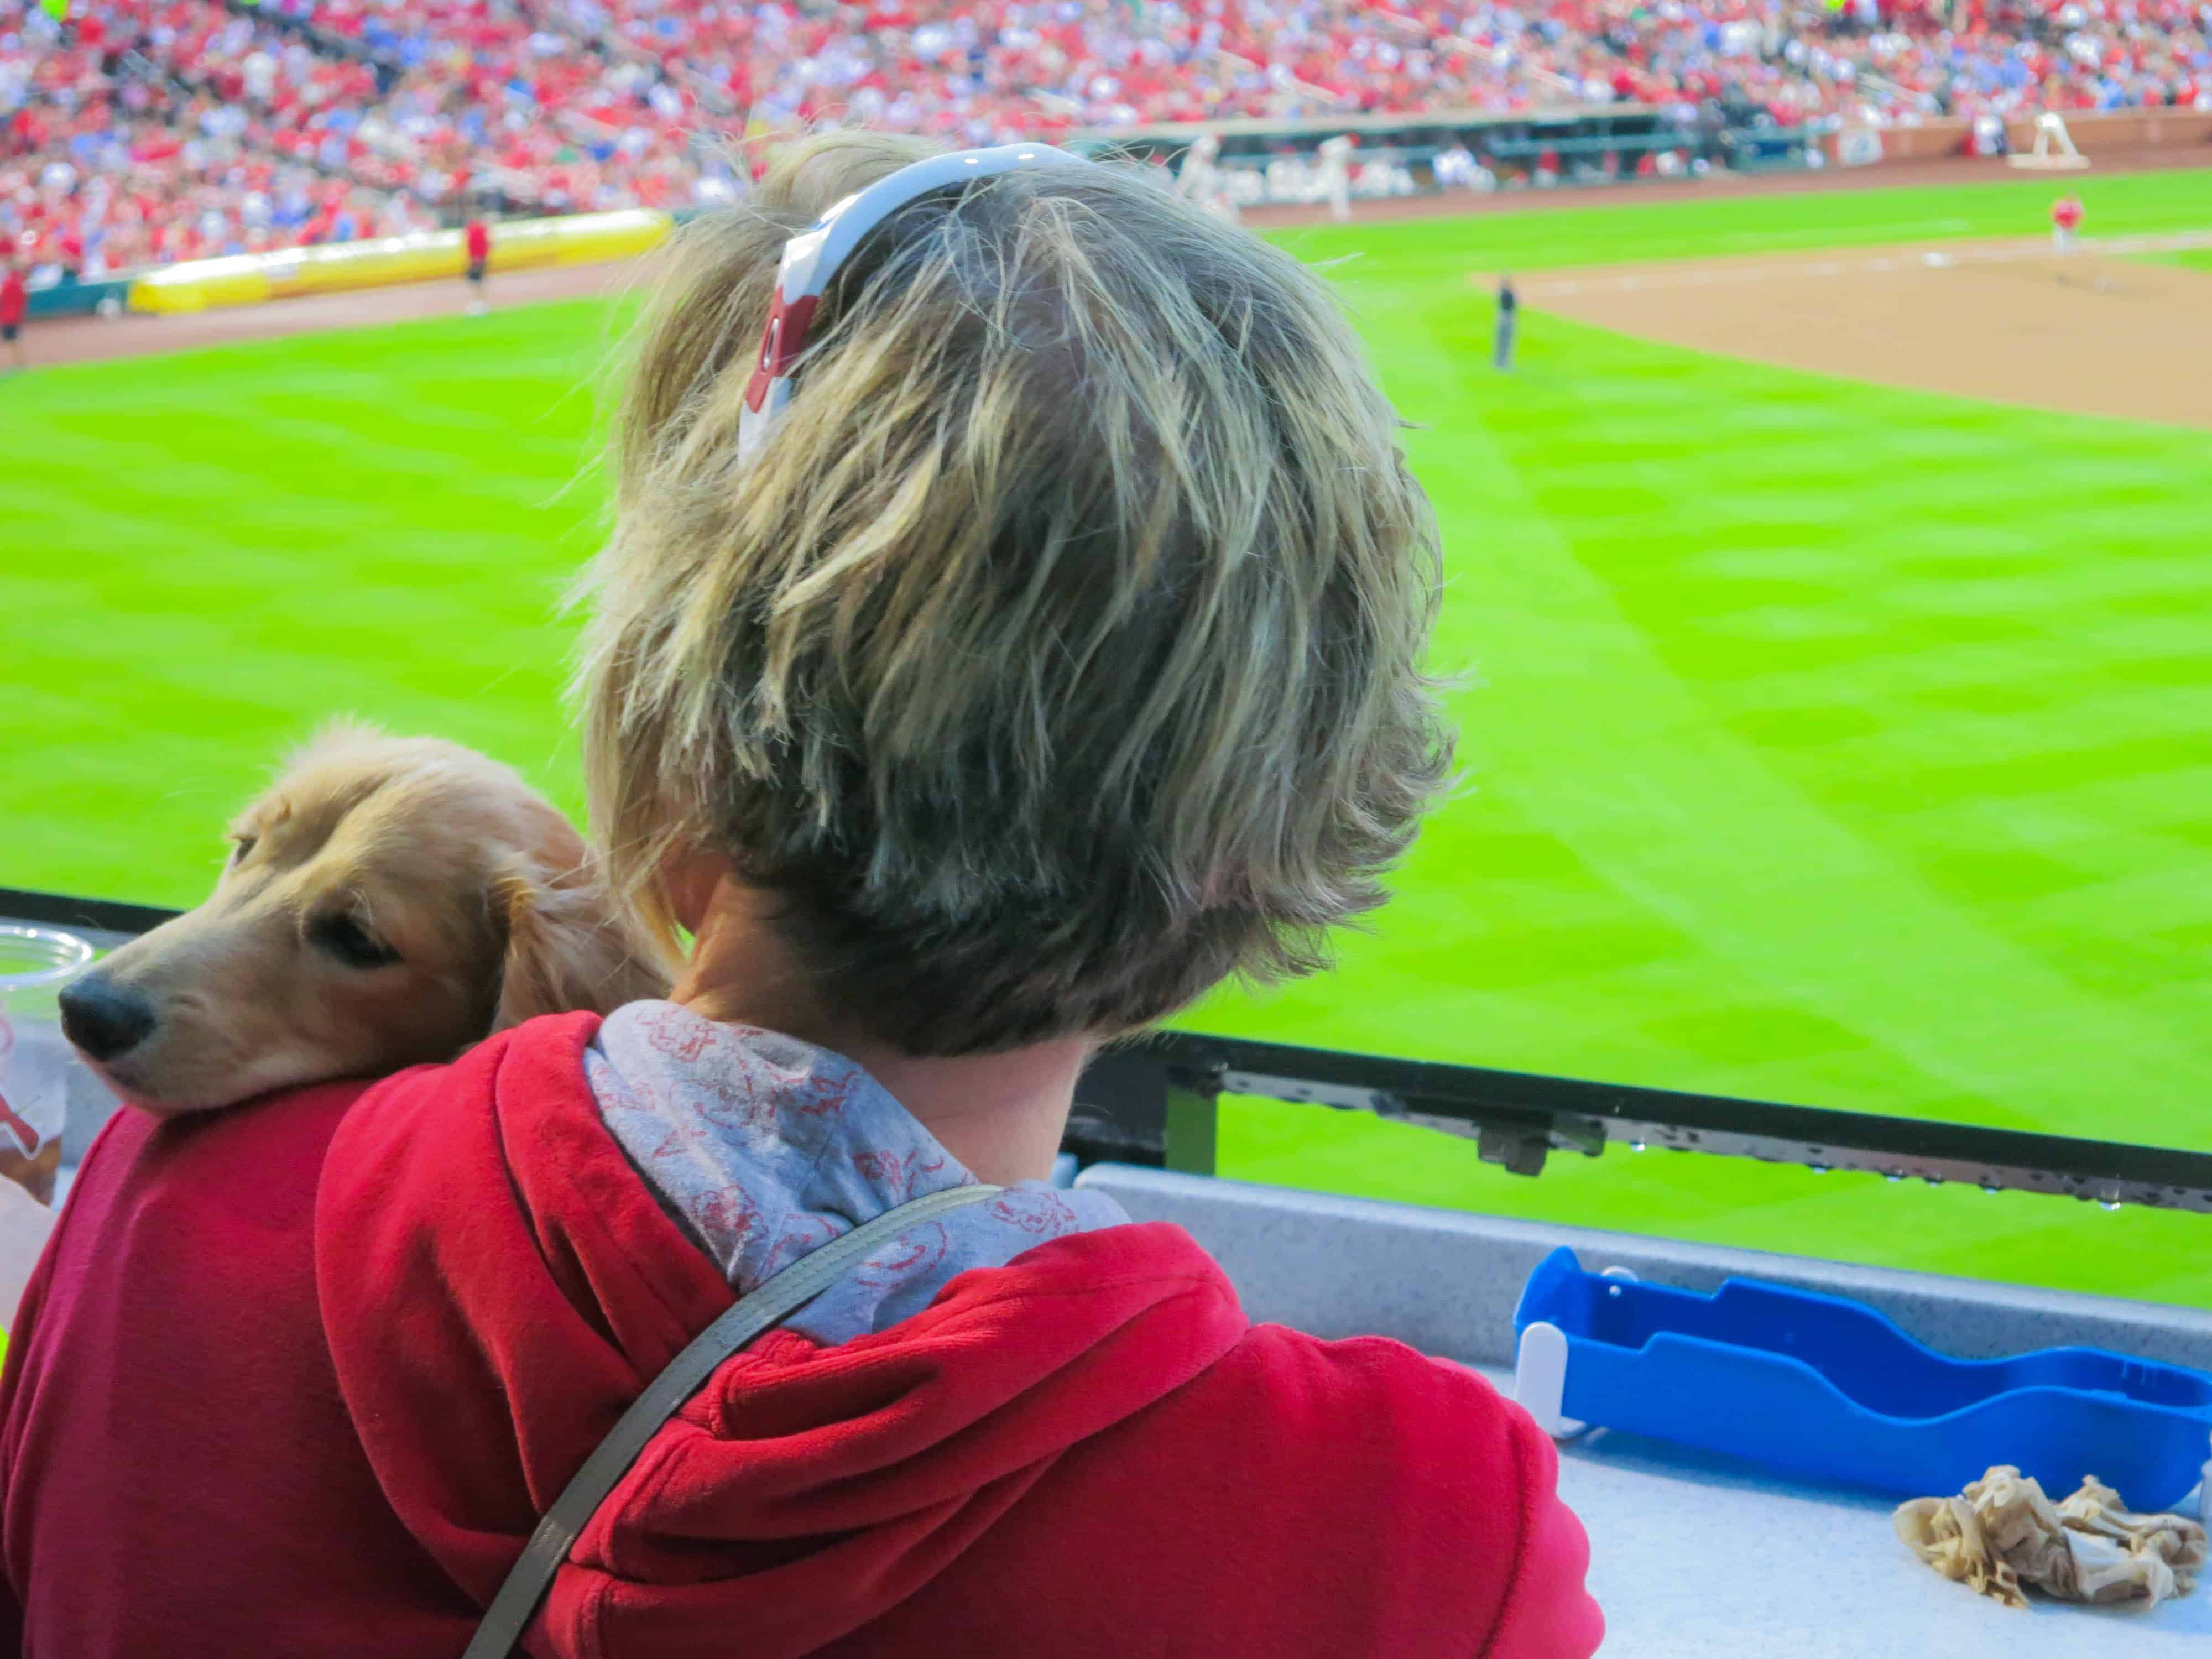 Pooches in the Park, marking our territory, petcentric, purina, st. louis cardinals, dog adventure, dog blog